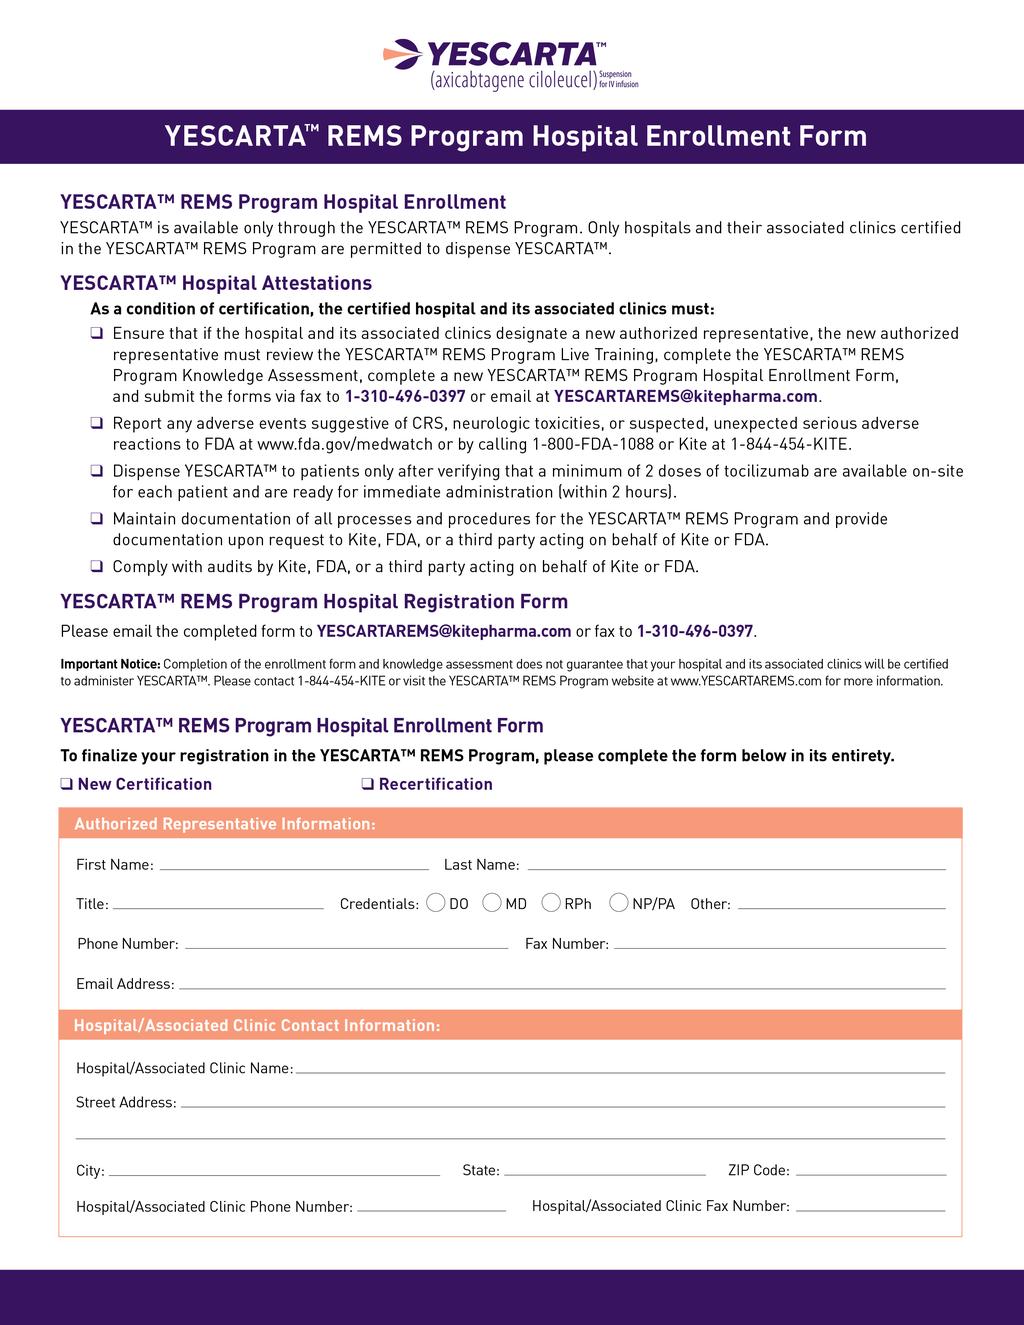 YESCARTA REMS Program Hospital Enrollment Form To finalize registration in the YESCARTA REMS Program, complete the form in